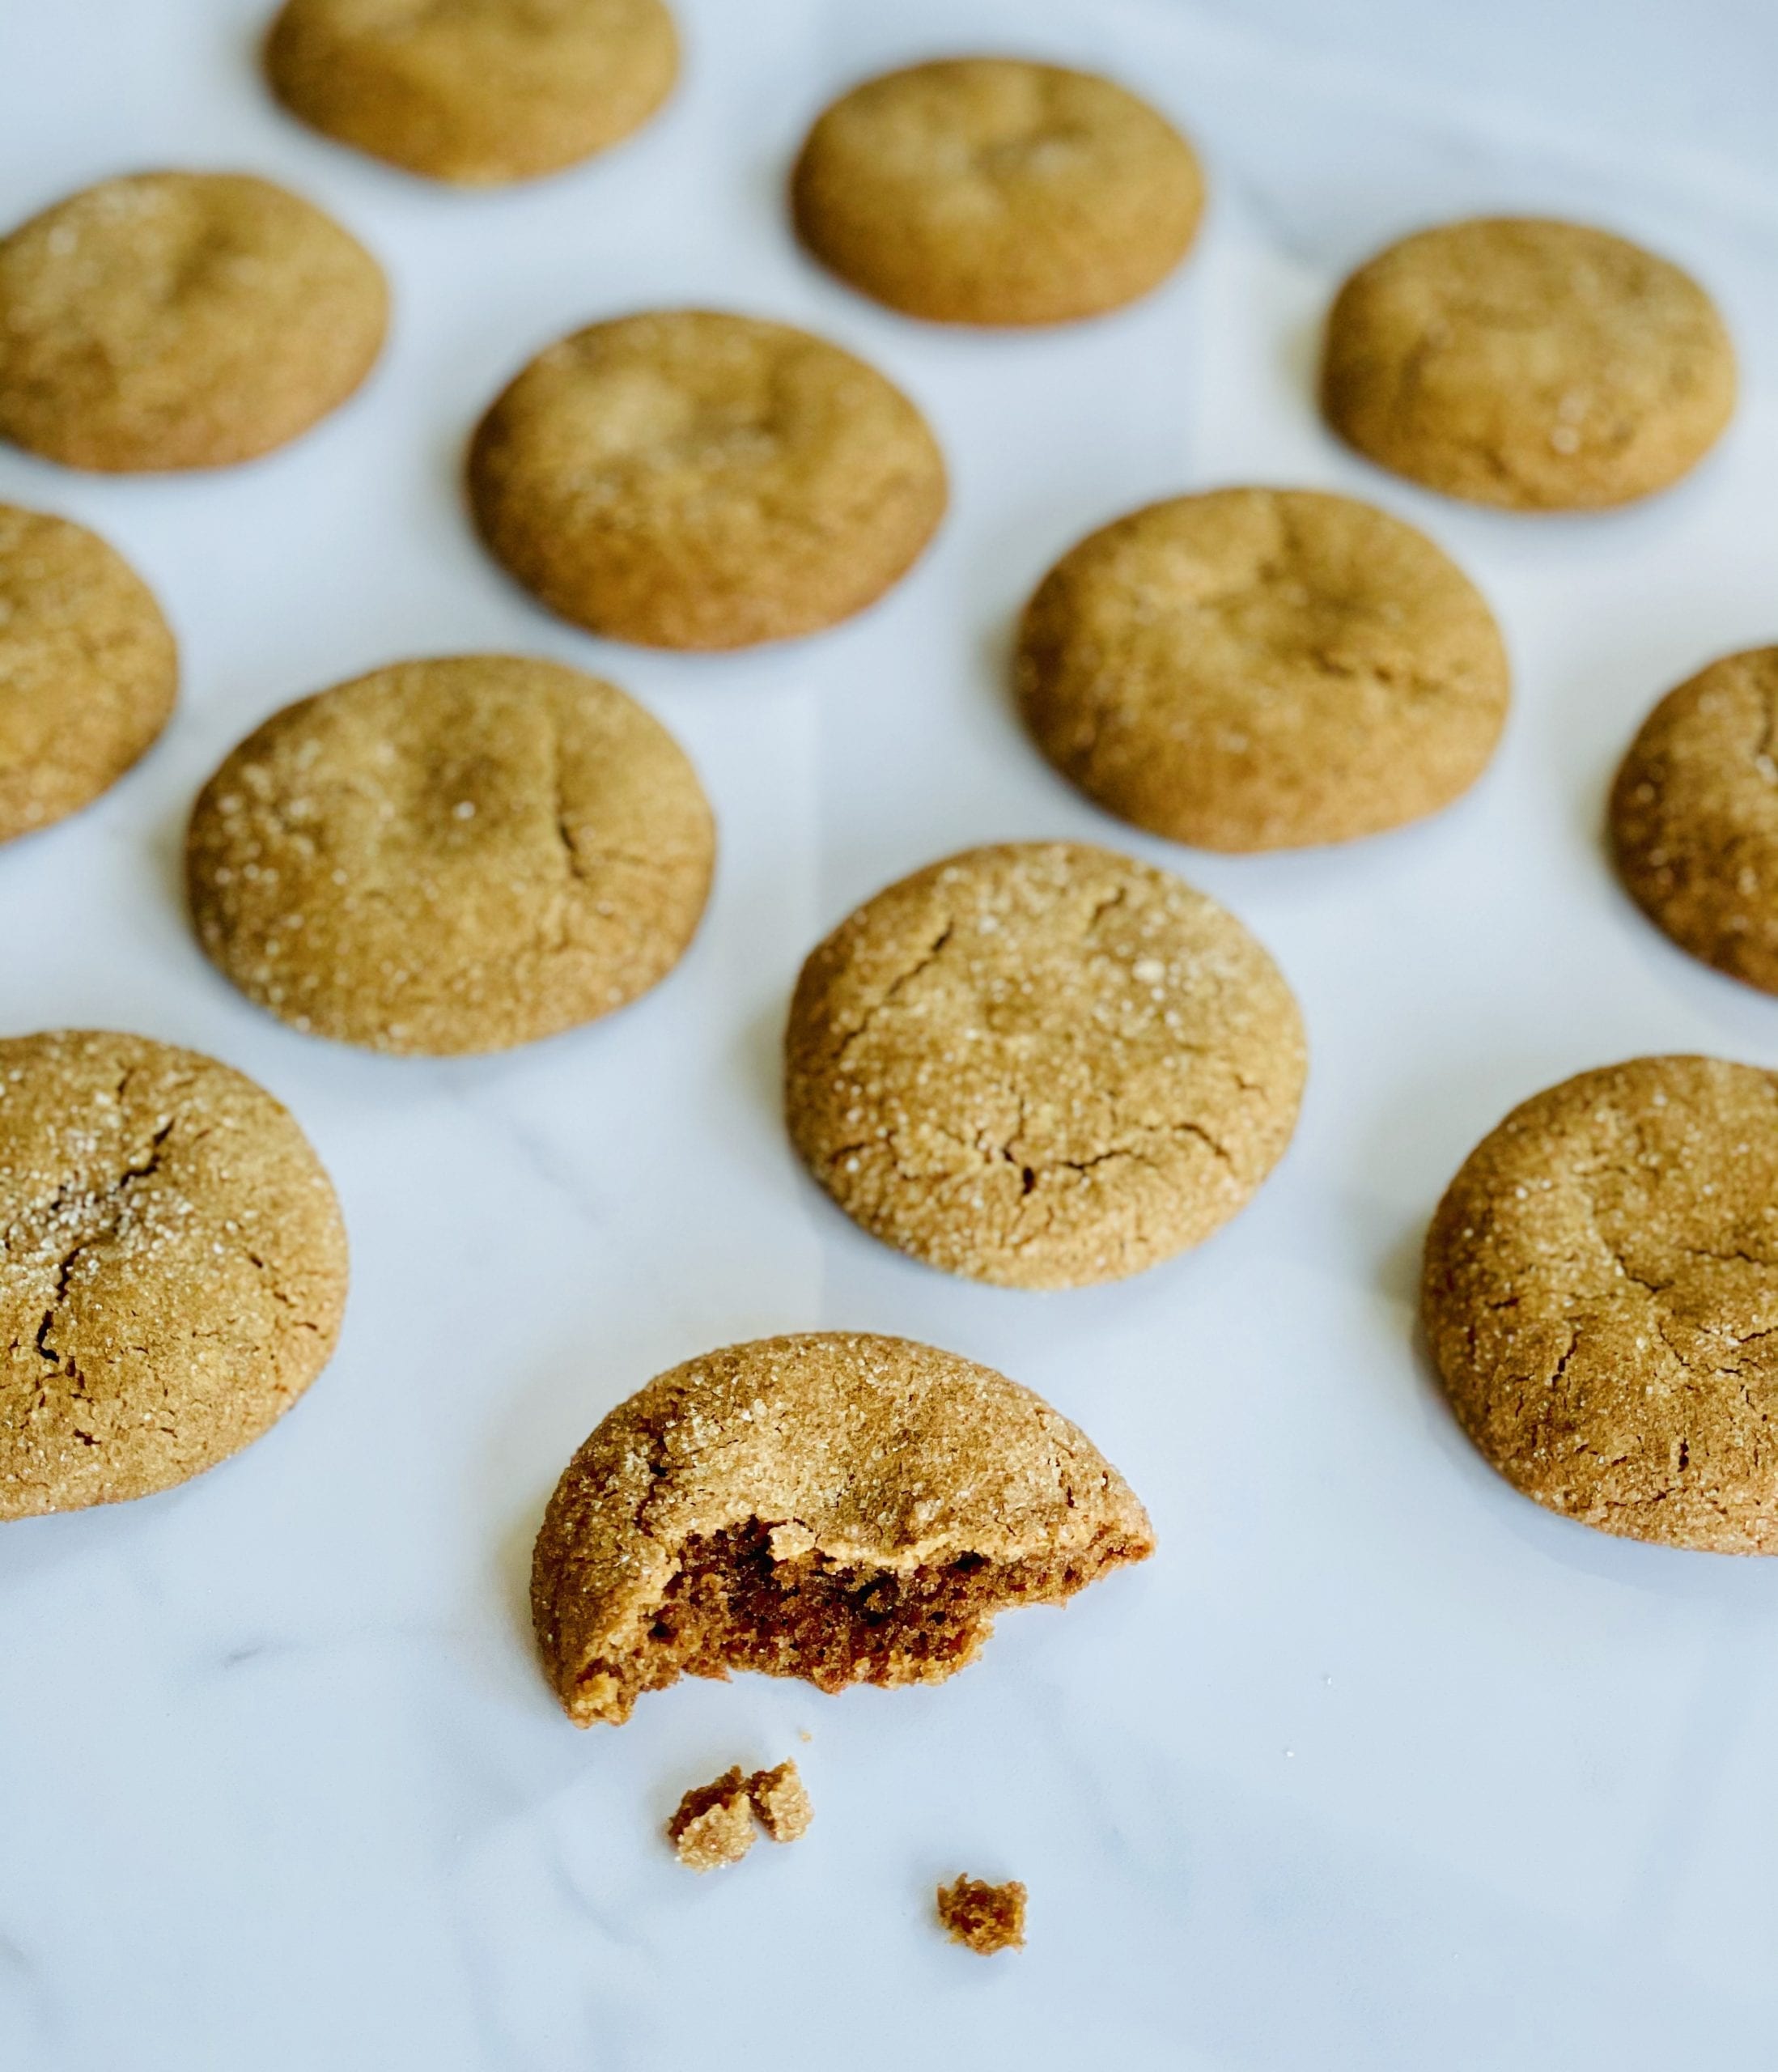 chewy molasses cookies, molasses cookies, molasses cookies recipe, recipe for molasses cookies, molasses spice cookies